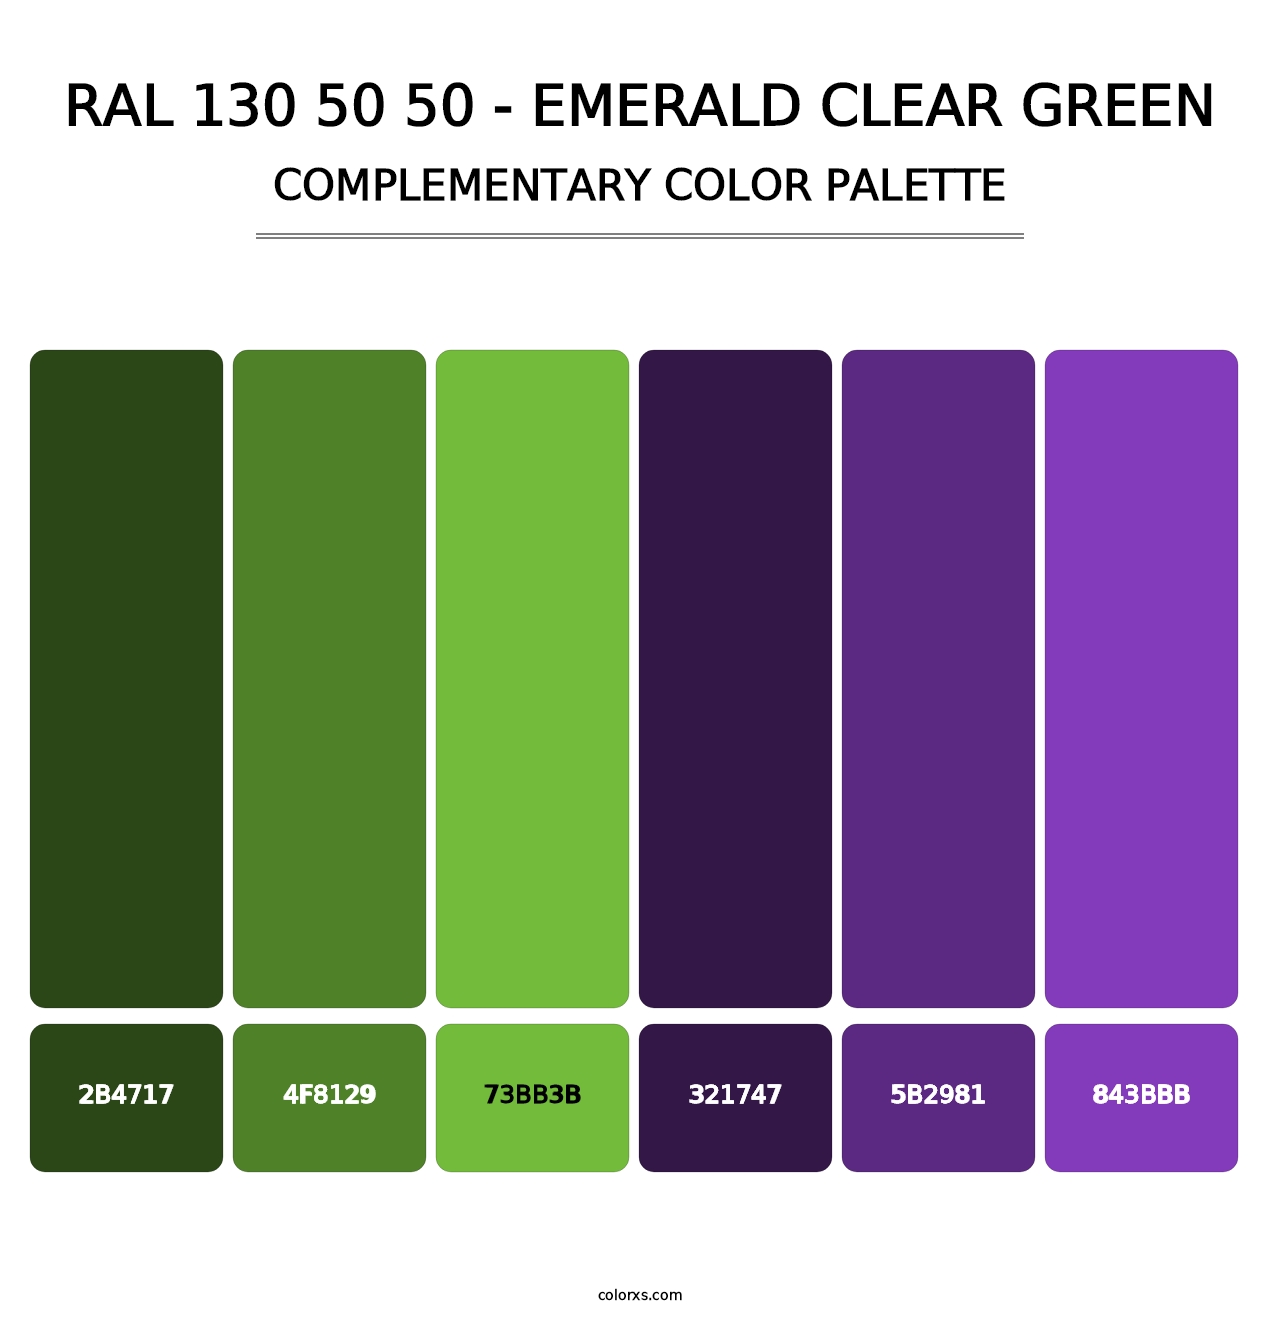 RAL 130 50 50 - Emerald Clear Green - Complementary Color Palette